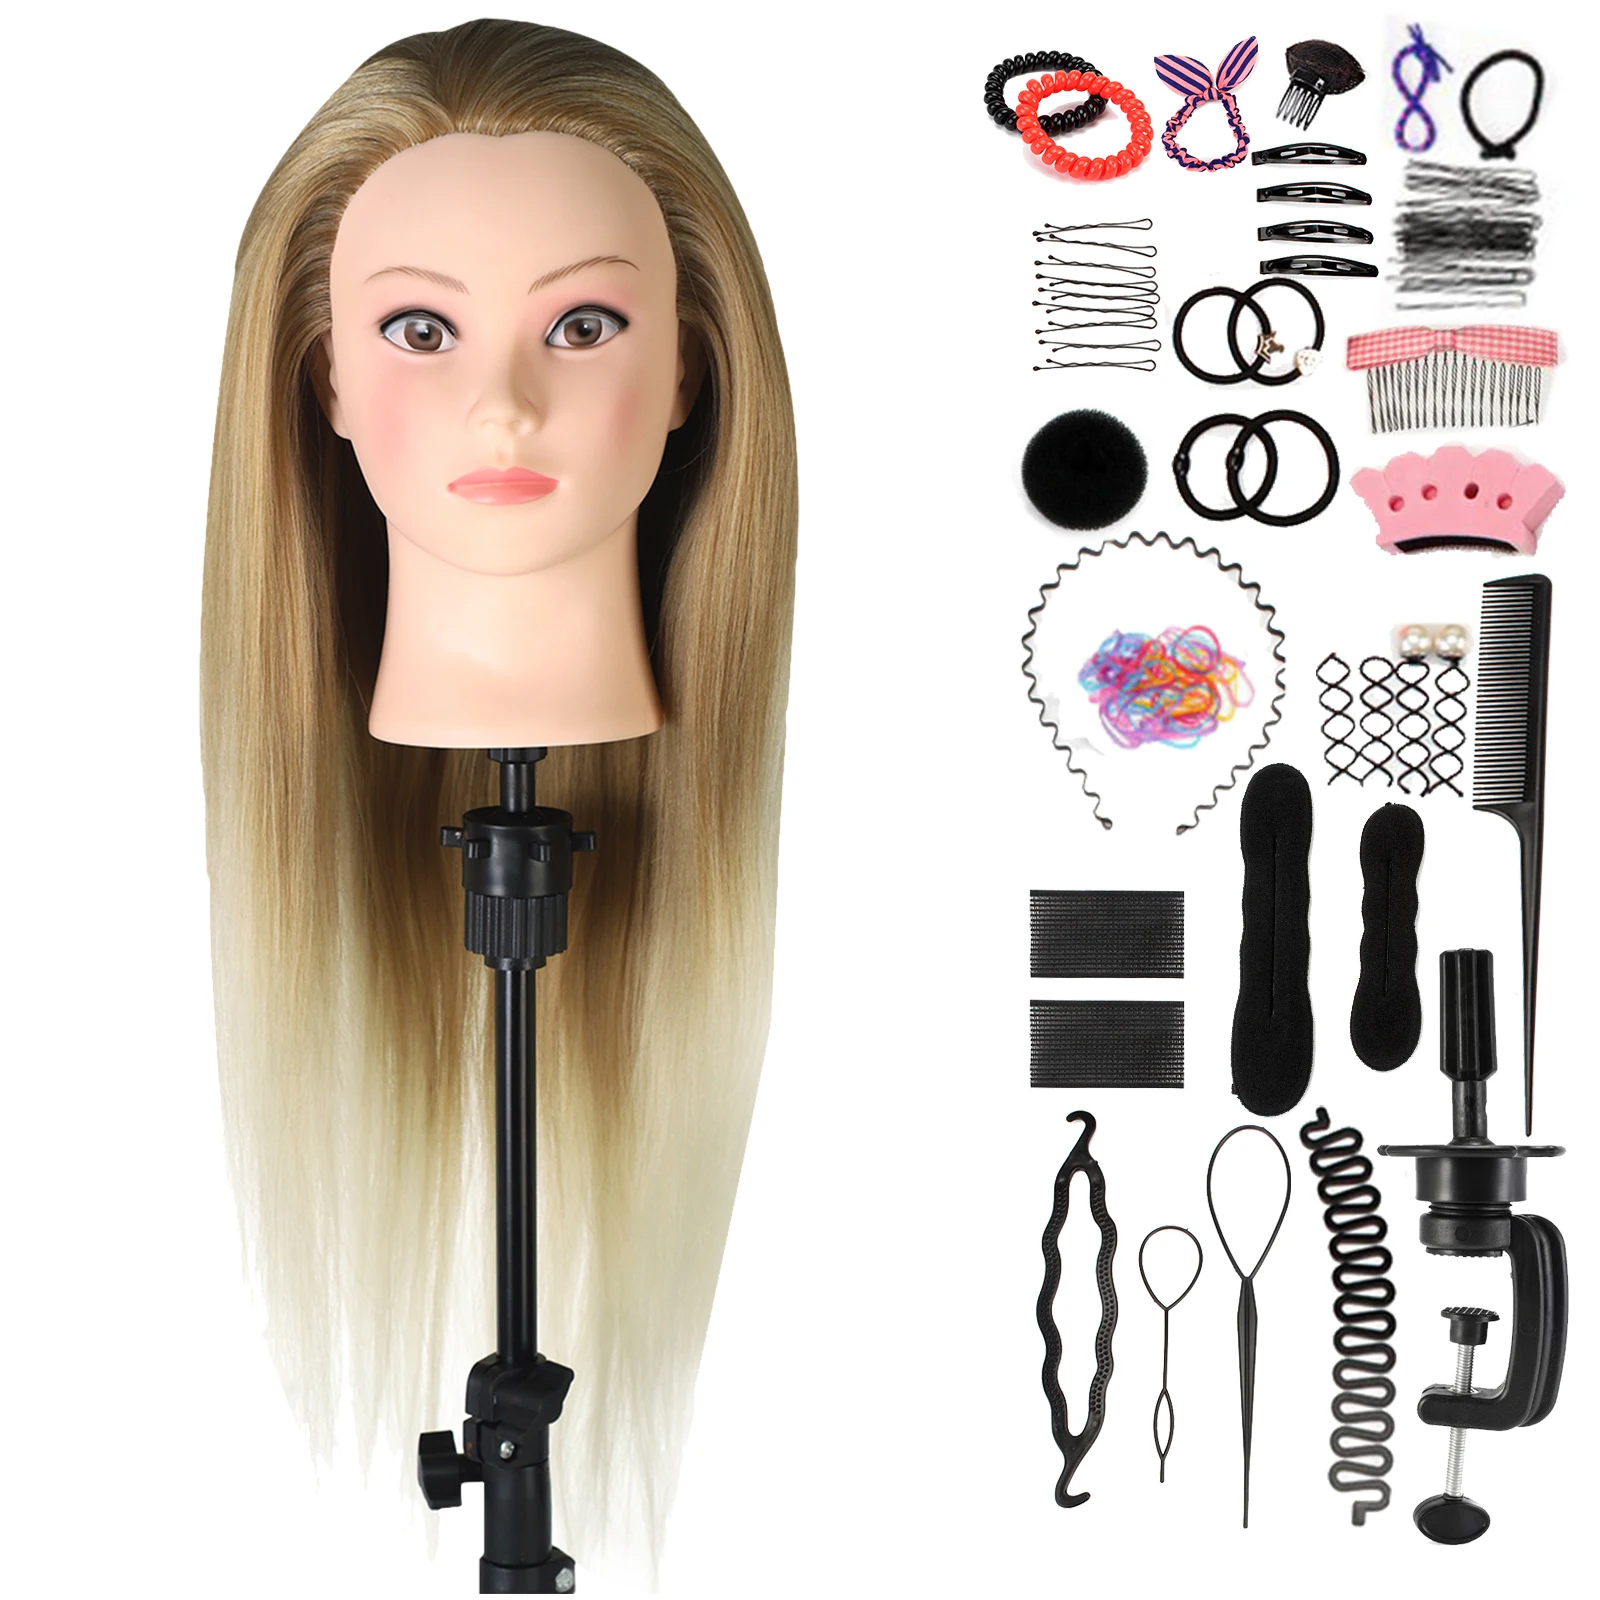 

Cosmetology Mannequin Head With 66cm Long Thick Synthetic Hair Gradient Colors Salon Hairstyles Professional Trainging Doll